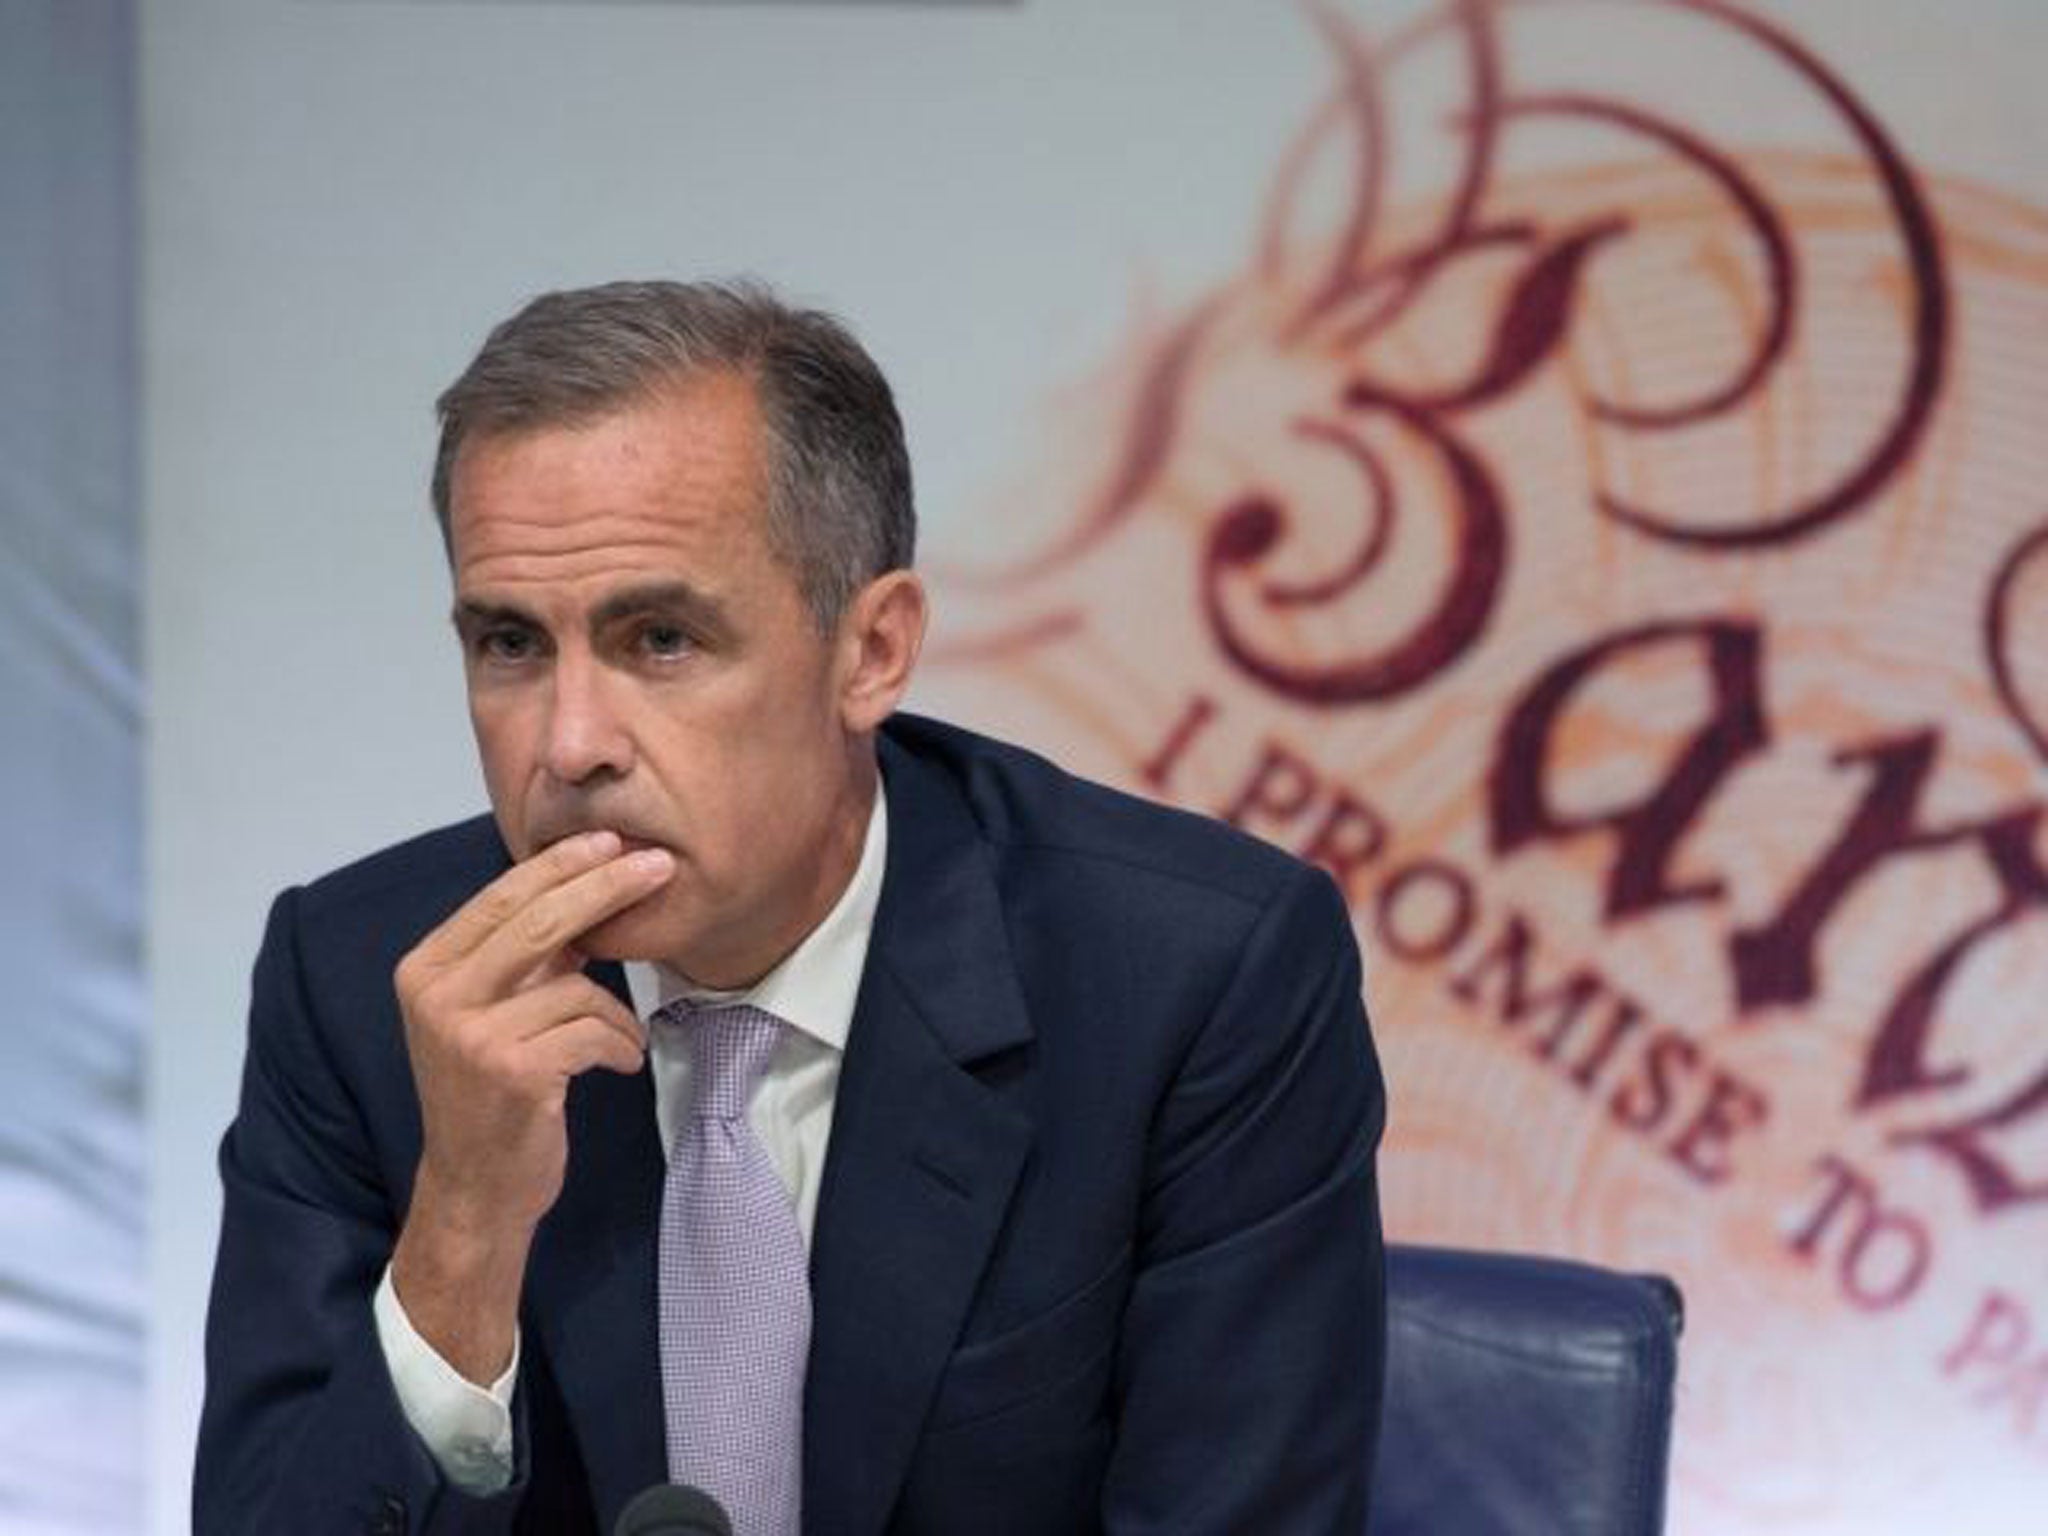 Bank Governor Mark Carney might not raise rates until 2017